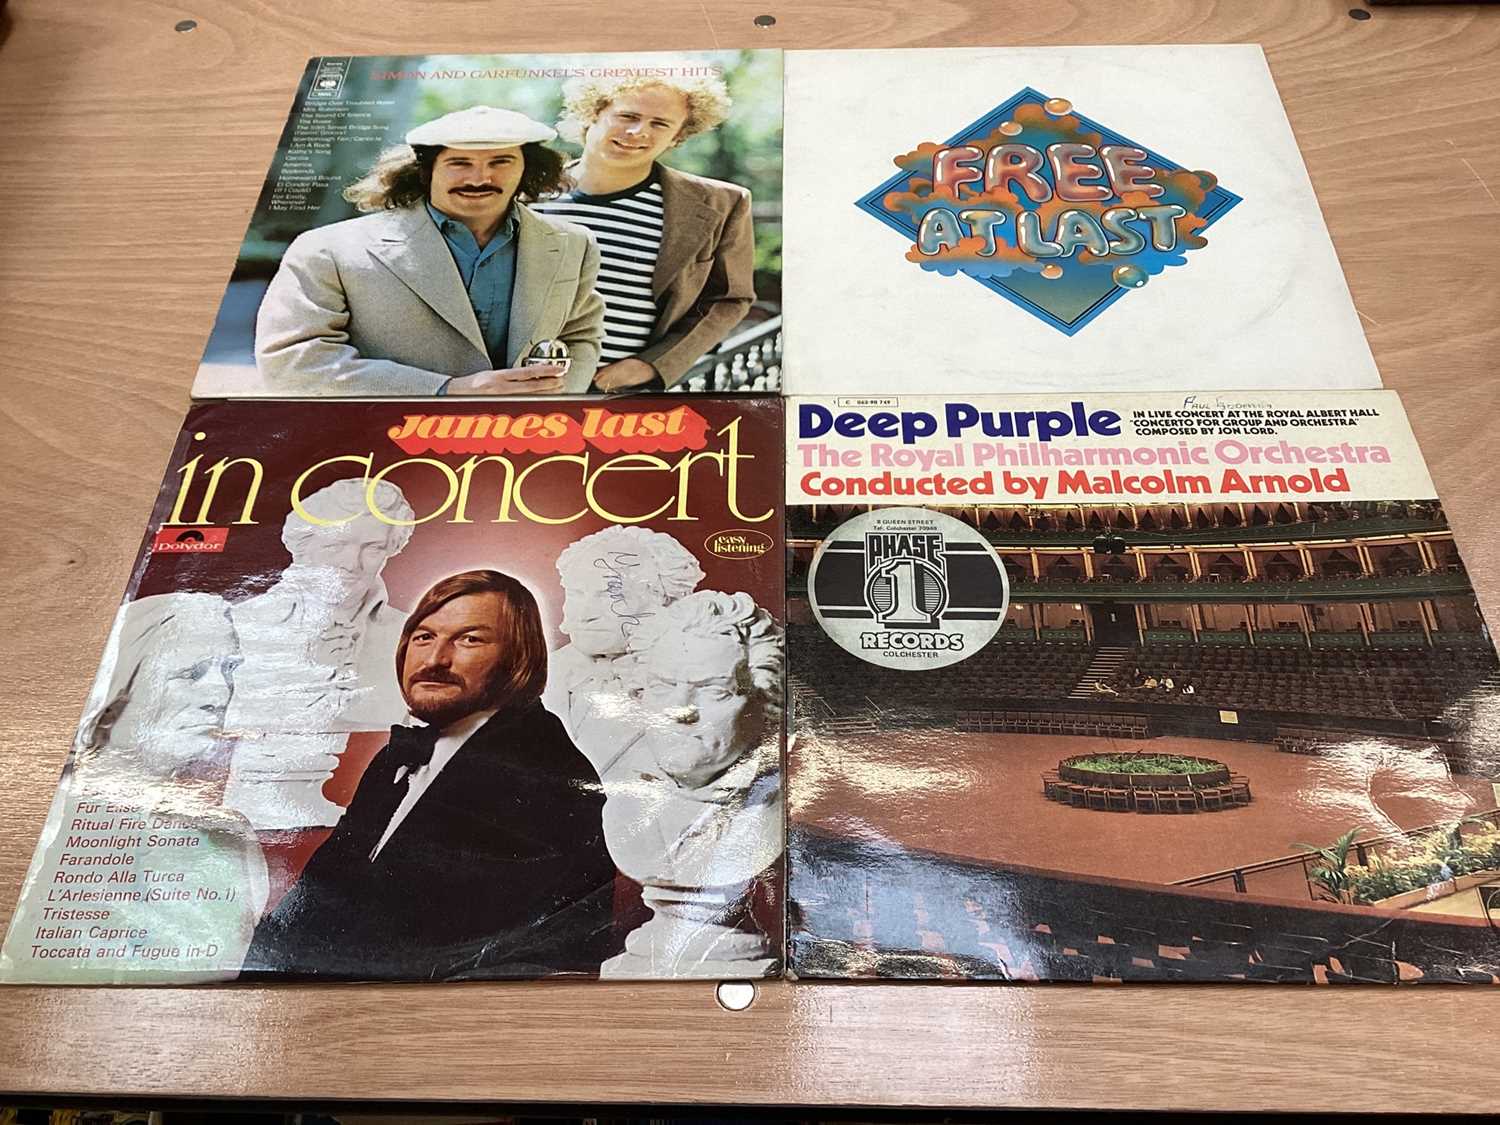 Two vintage cases of LP records, 78's and 45's including Ray Conniff, Deep Purple, ABBA, Petula Clar - Image 4 of 11